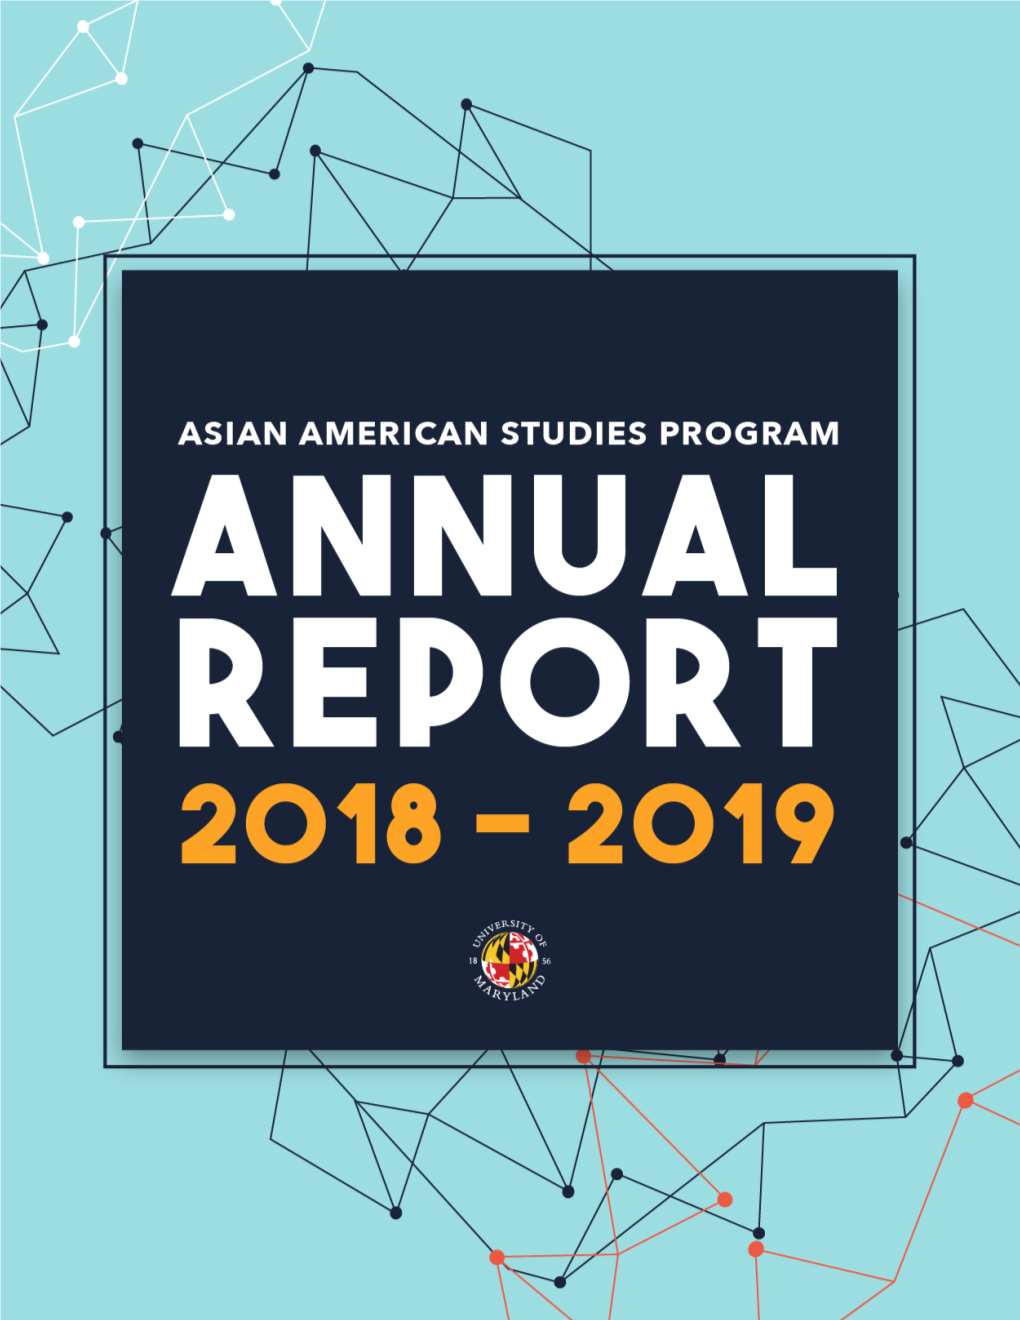 About the Asian American Studies Program